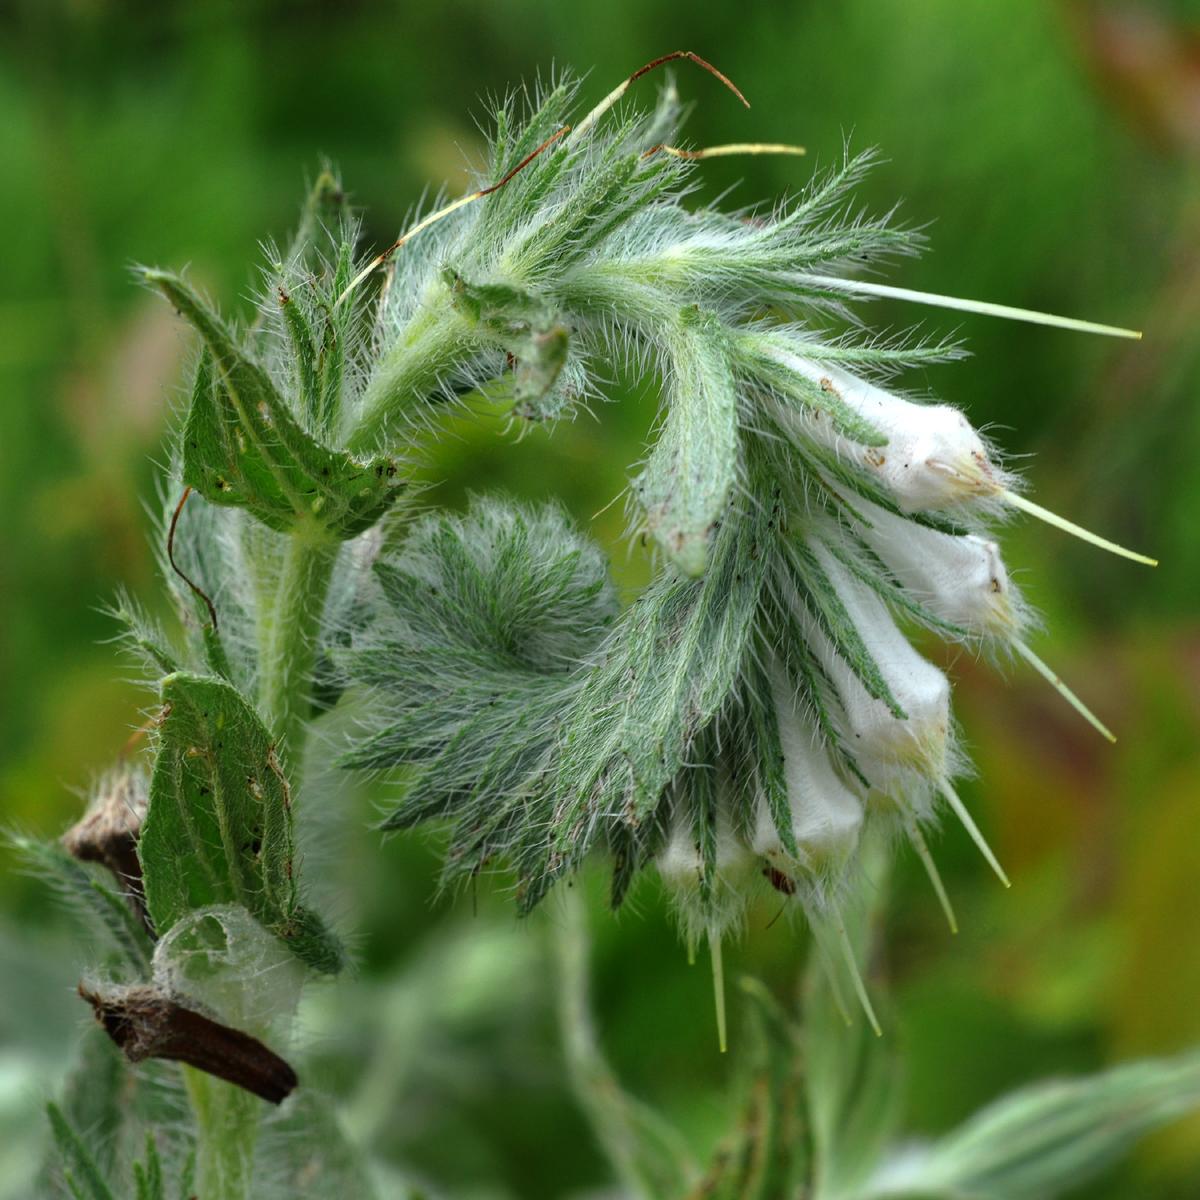 White-beige buds with lime-white stigma, , white hair, green leaves and stems, yellow midrib and veins.